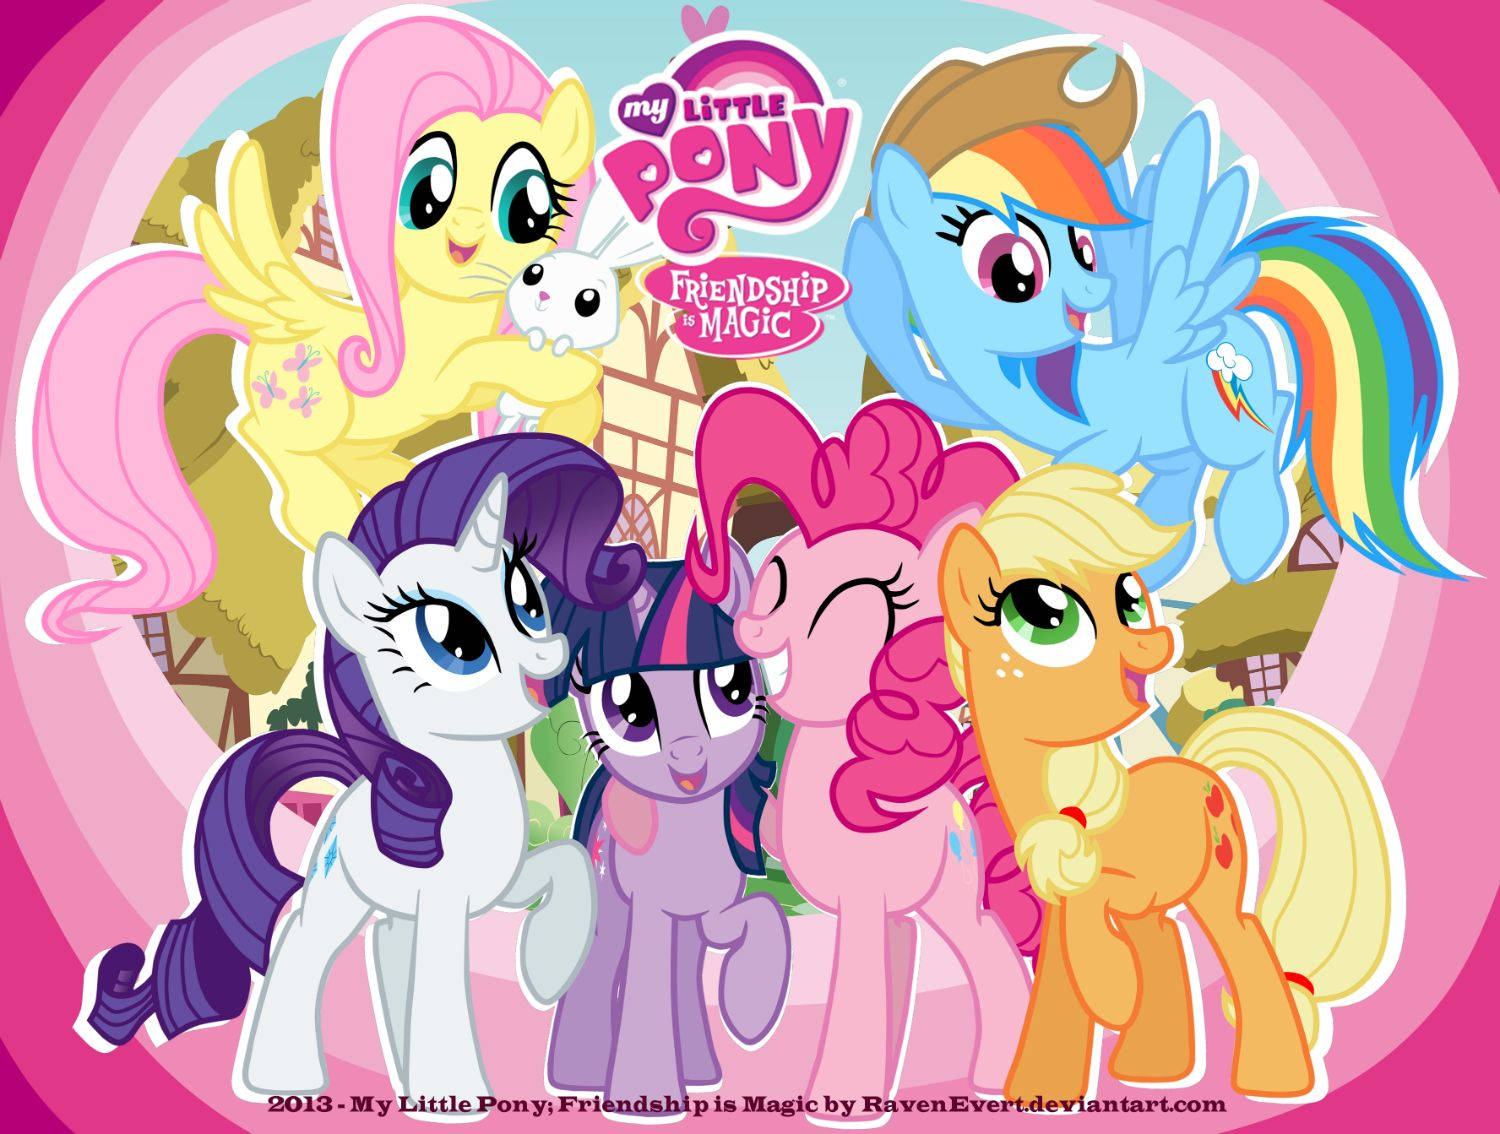 Movie Poster Of My Little Pony Wallpaper